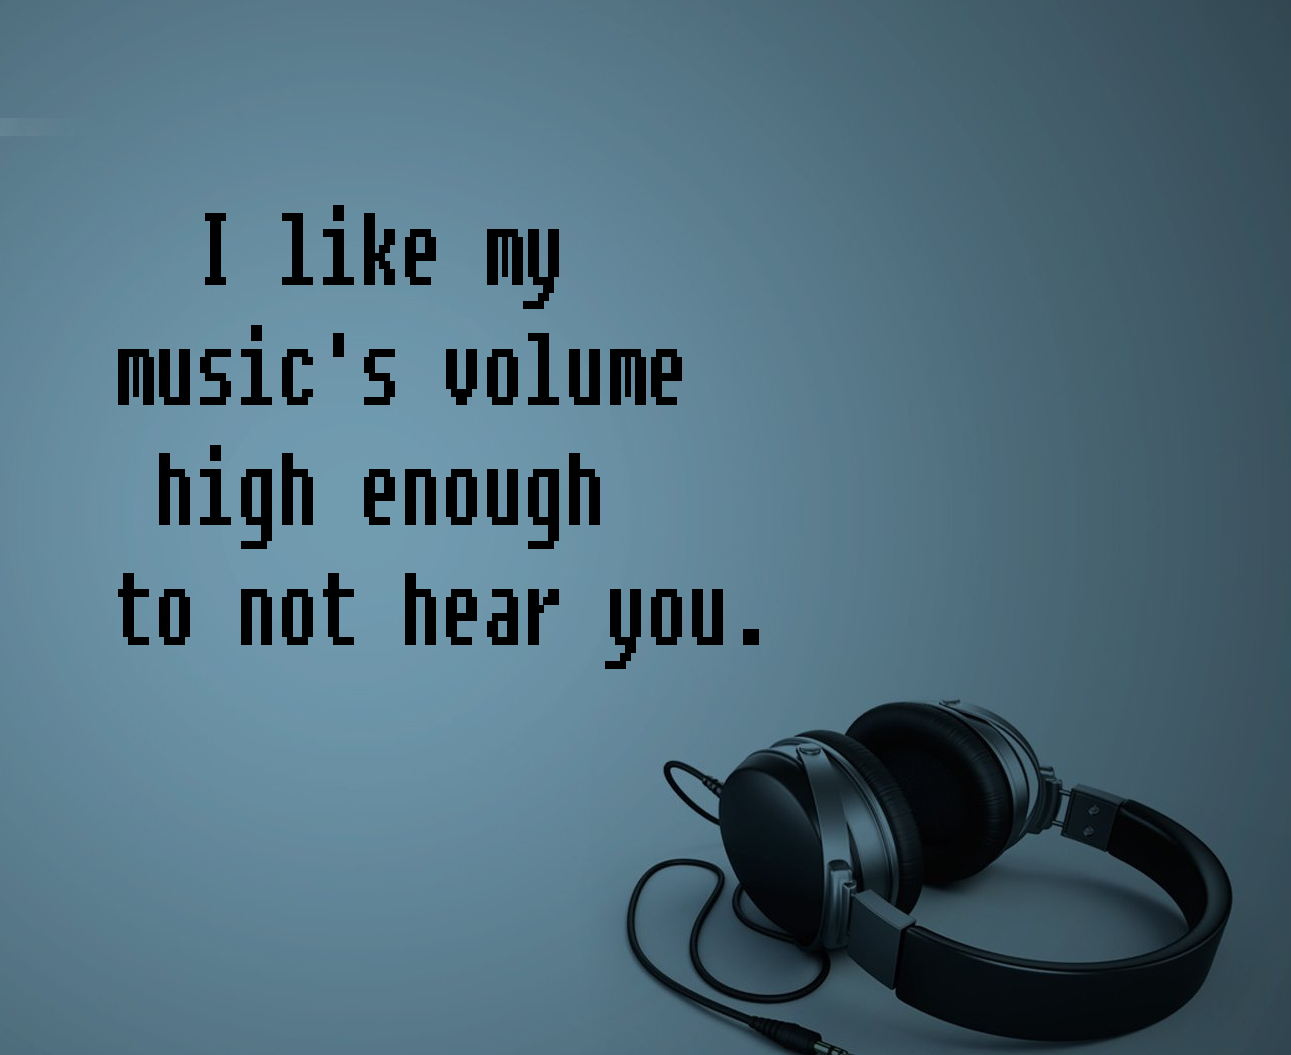 What sort of music. Music quotes. Quotes about Music. Sayings about Music. Words about Music.